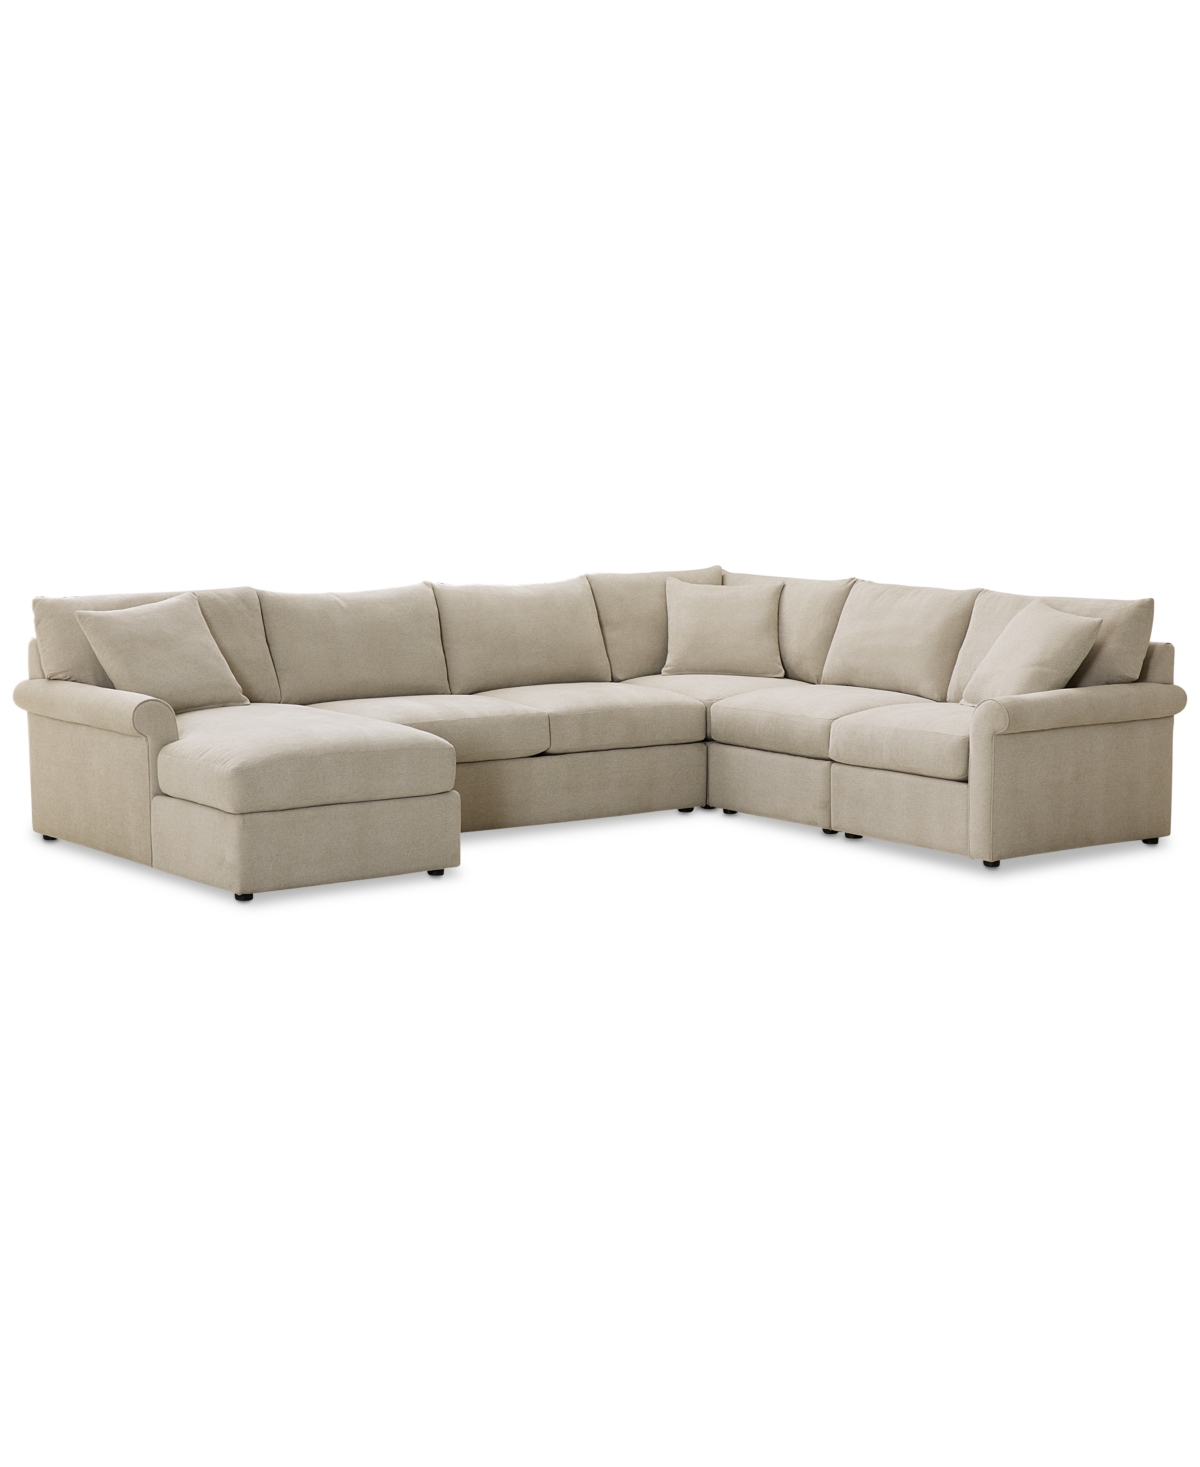 Furniture Wrenley 138" 5-pc. Fabric Modular Chaise Sectional Sofa, Created For Macy's In Dove